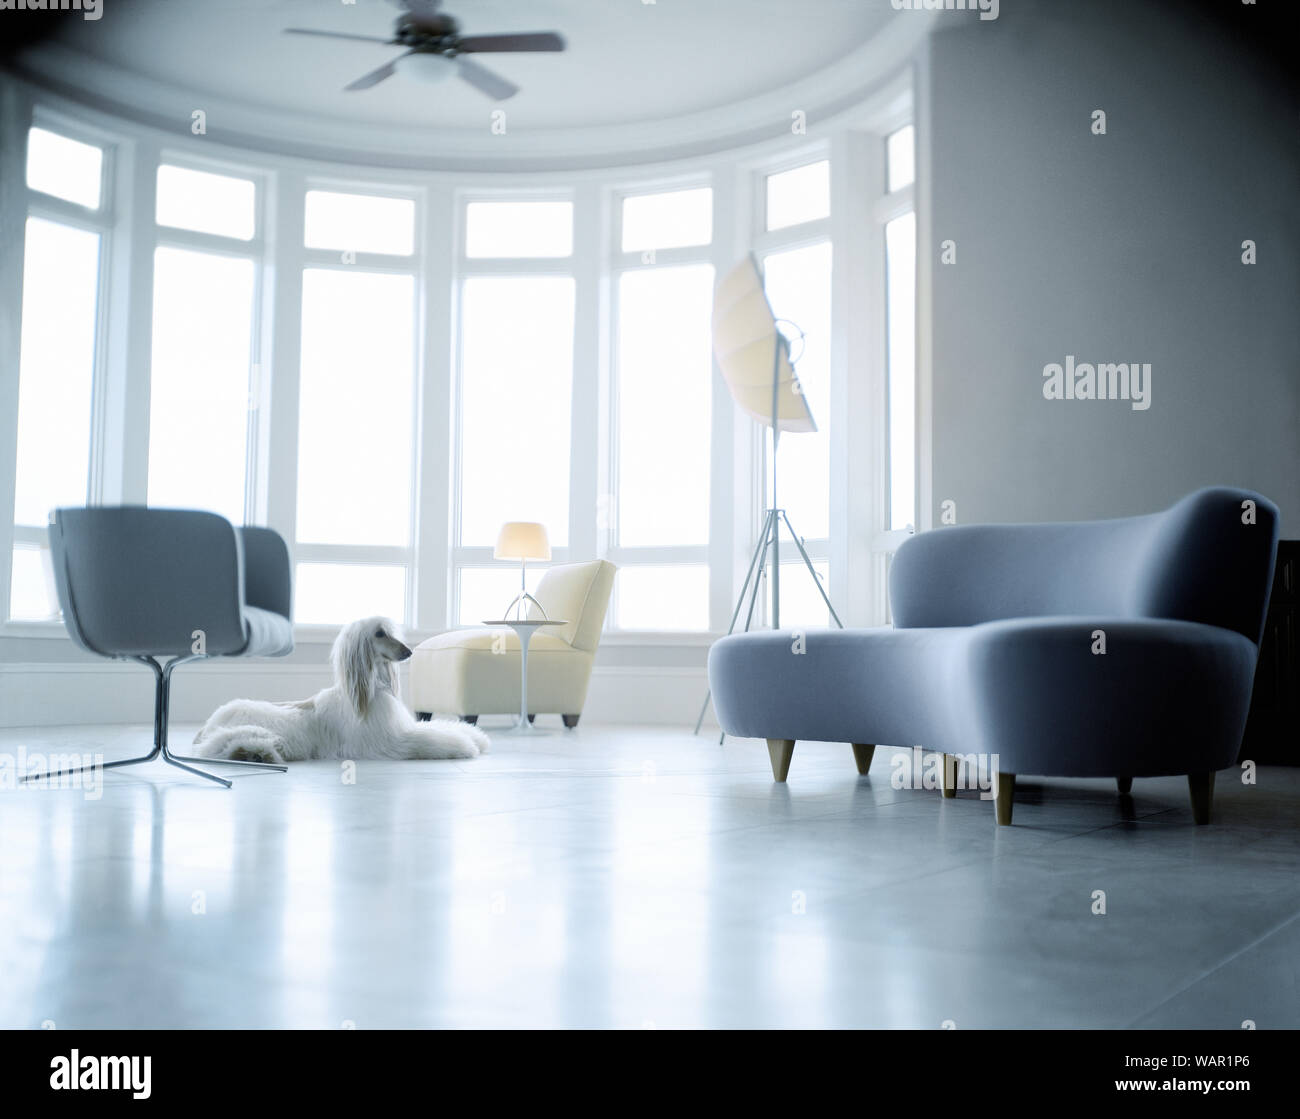 Living room with dog Stock Photo